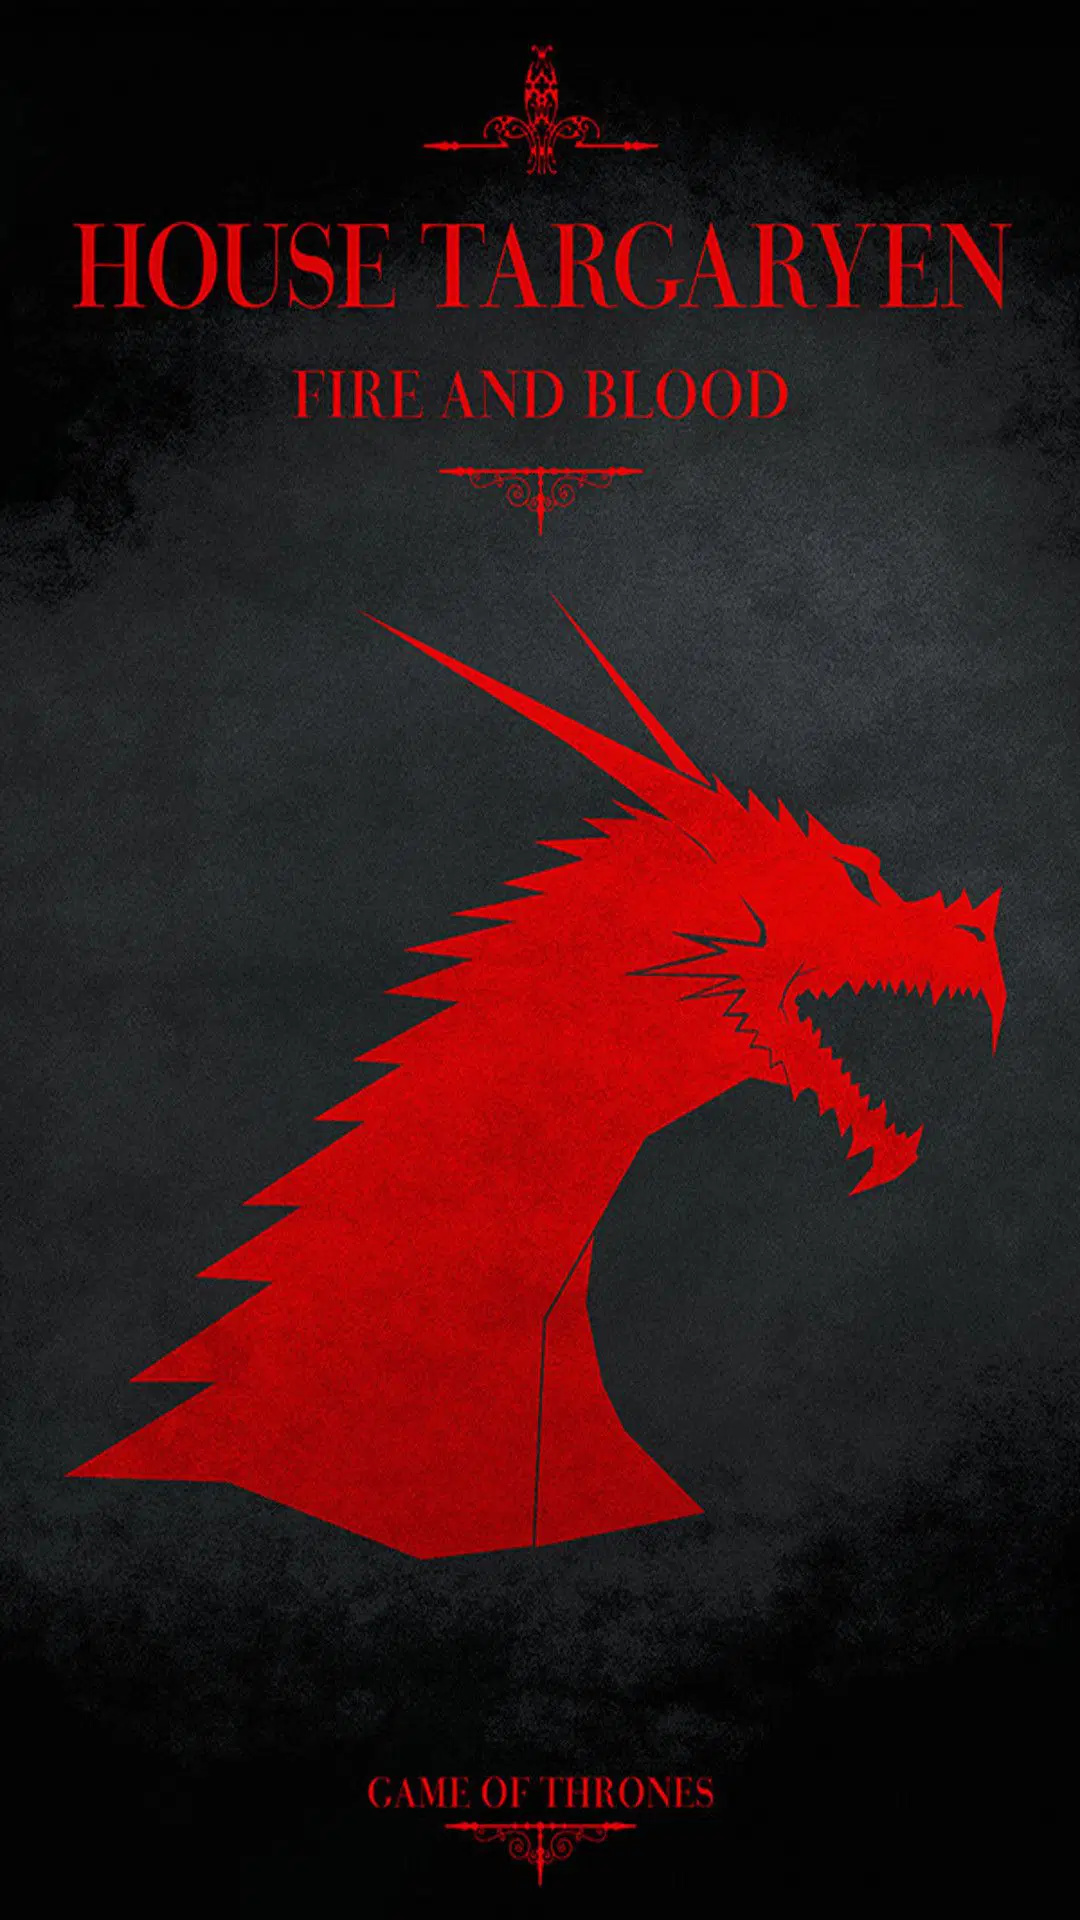 HD backgrounds, Android wallpaper, House Targaryen, 1080p and 4K wallpapers, 1080x1920 Full HD Handy